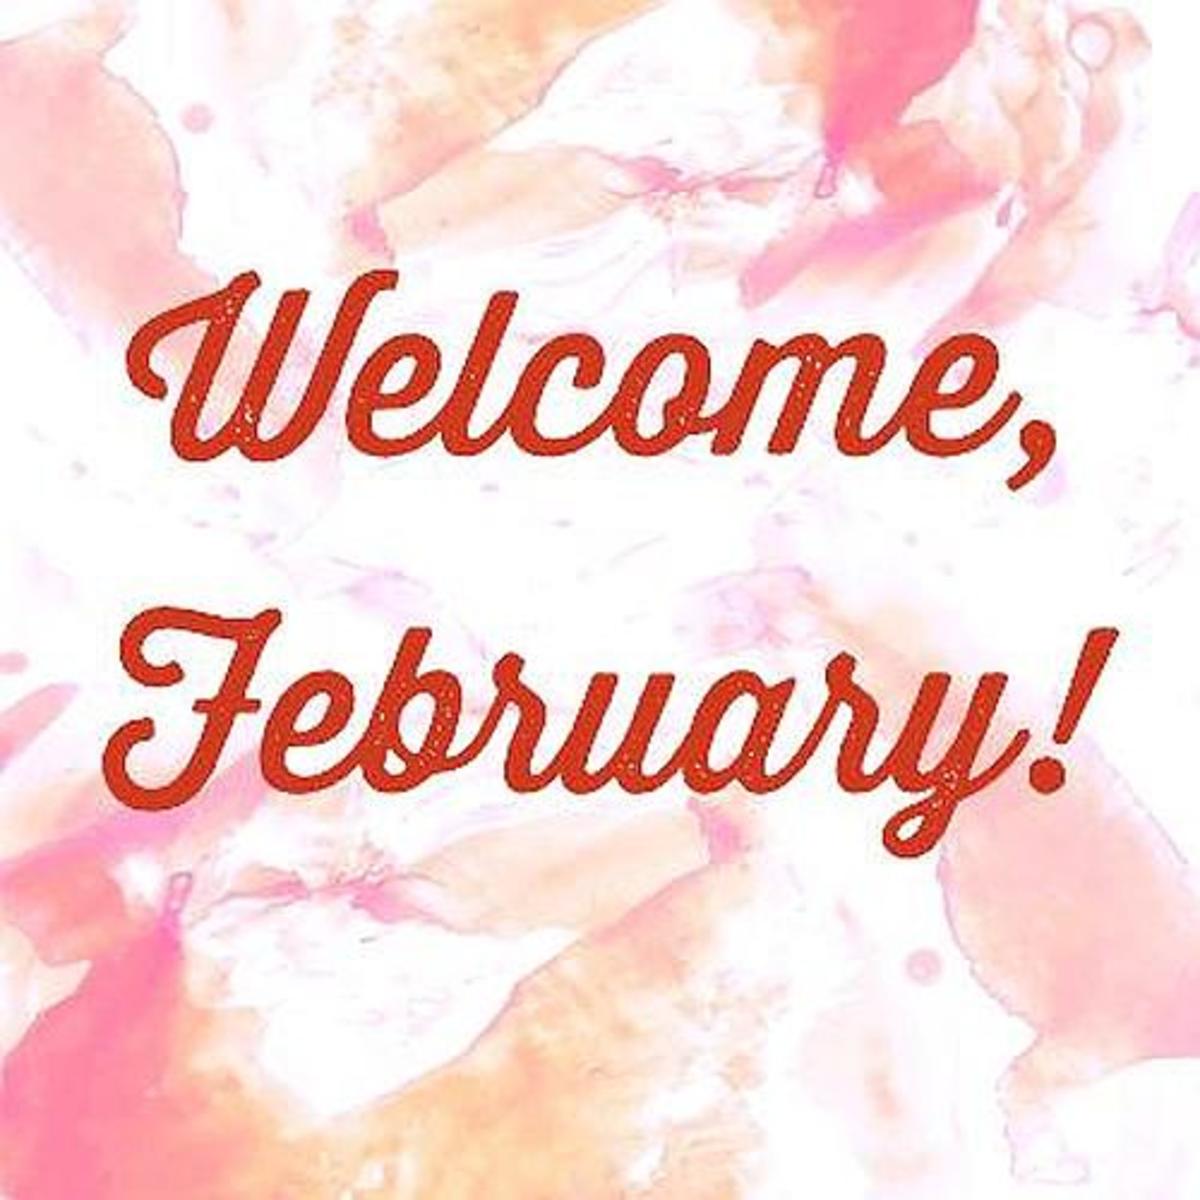 Interesting Things About the Month of February